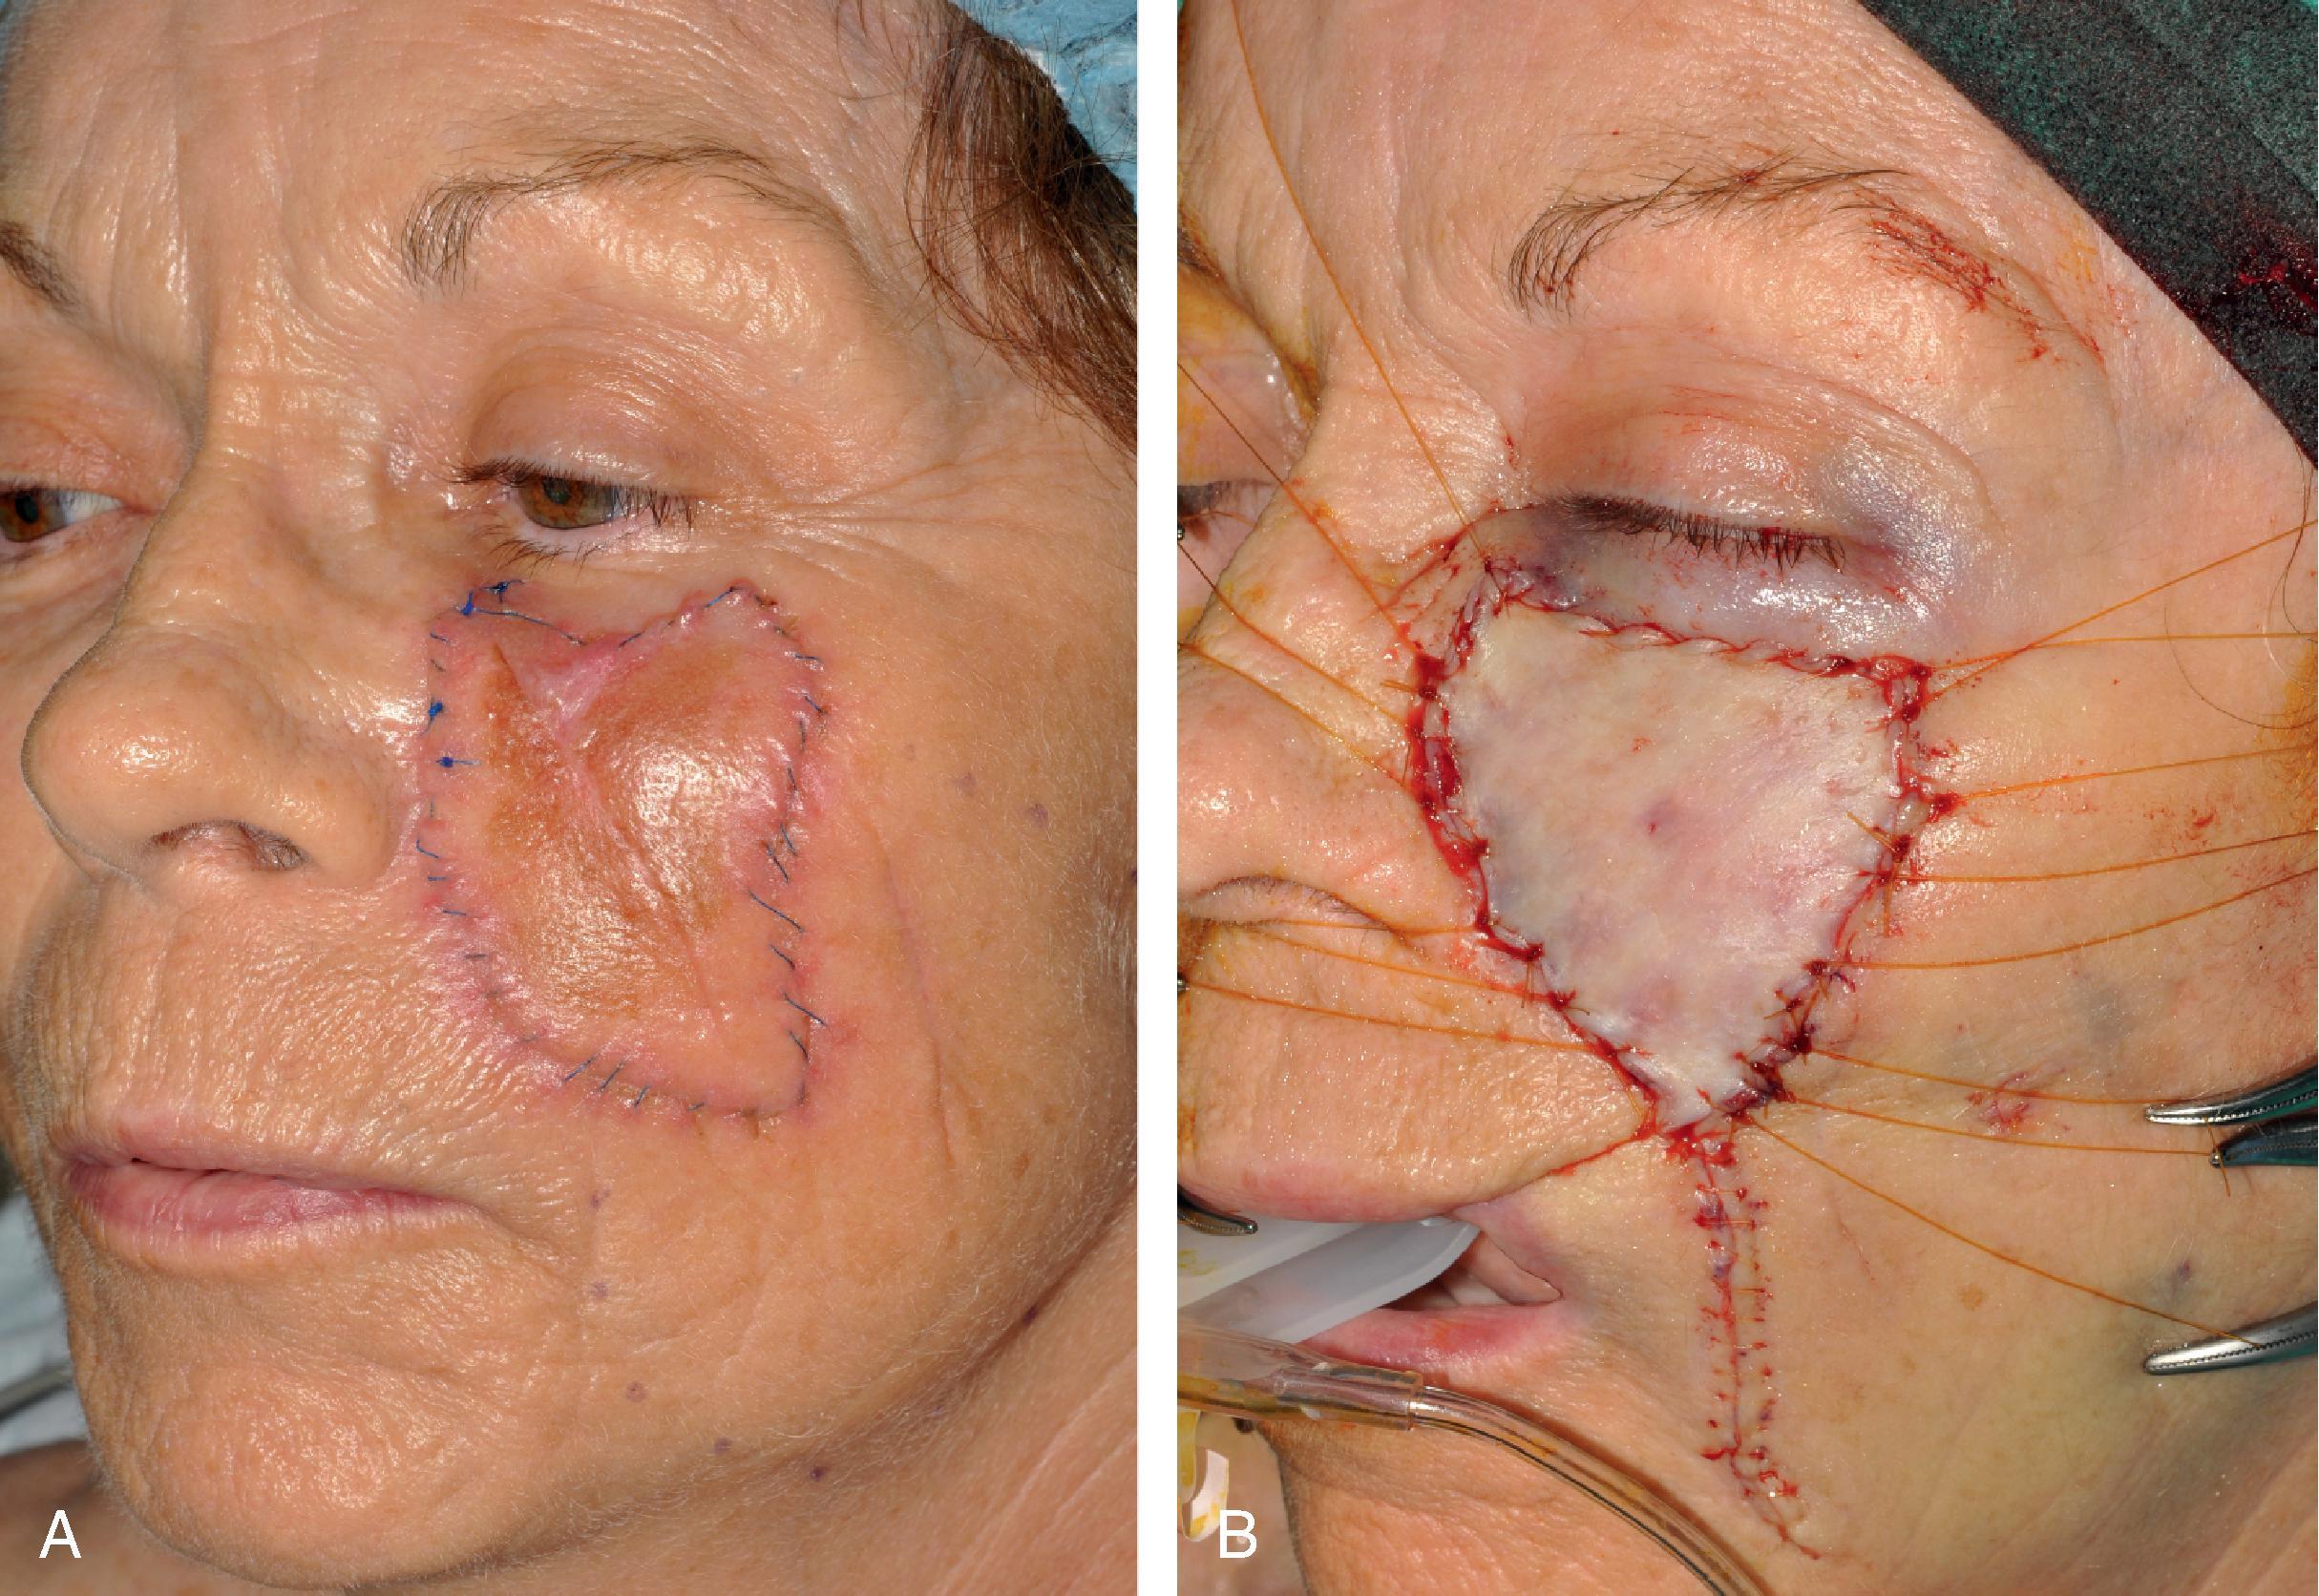 FIG. 15.2, A , A 5 × 4 cm melanoma in situ. Suture line marks planned excision. B , Melanoma excised. Resulting wound partially closed primarily. Remaining wound covered with 3.5 × 4.0 cm full-thickness skin graft harvested from the supraclavicular fossa. C , D , One year postoperative. Z-plasties performed at superior border of graft. (Courtesy Shan R. Baker, MD.)